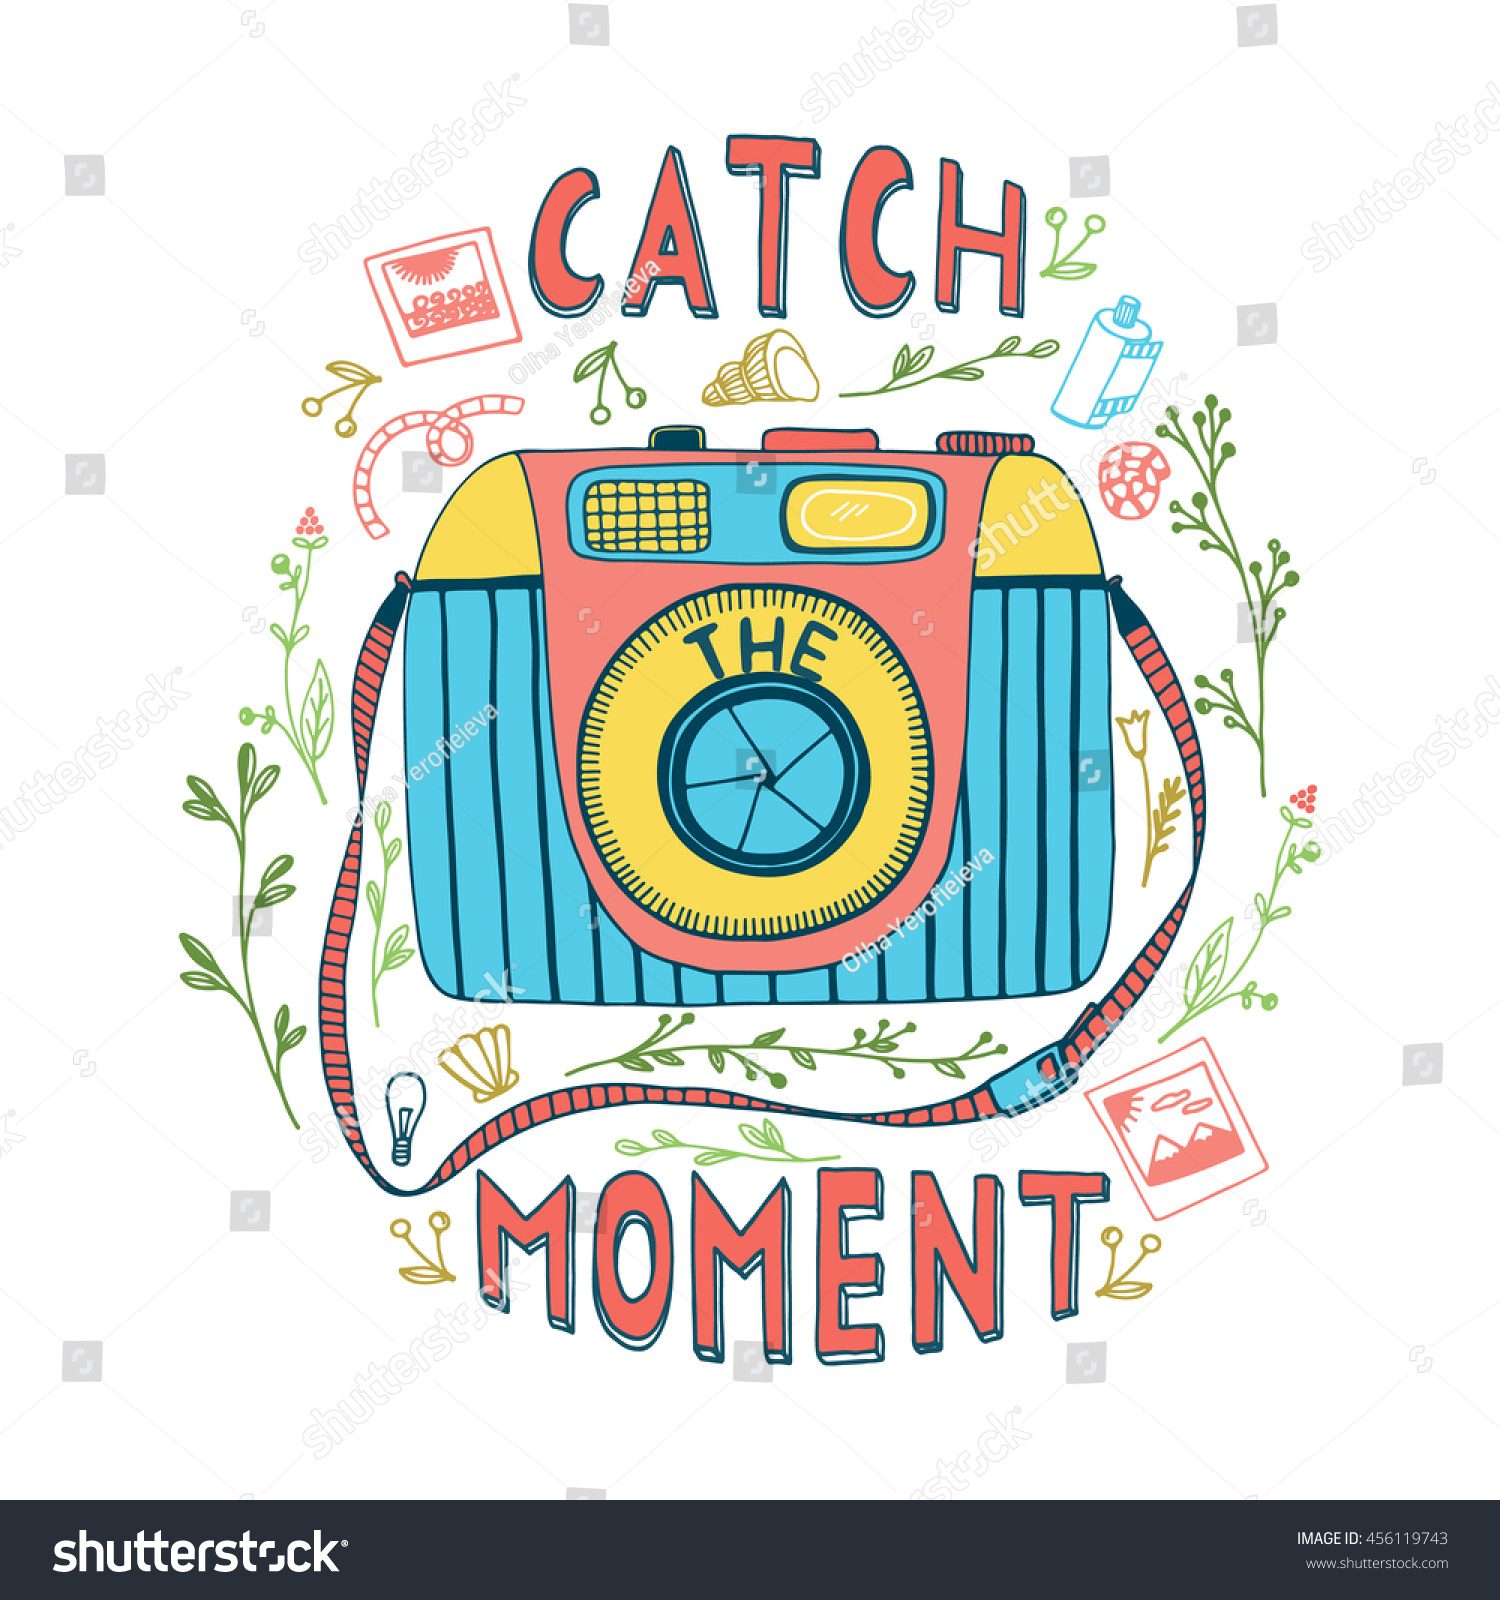 Catch Moment Motivational Quote Hand Drawn Stock Vector Royalty Free